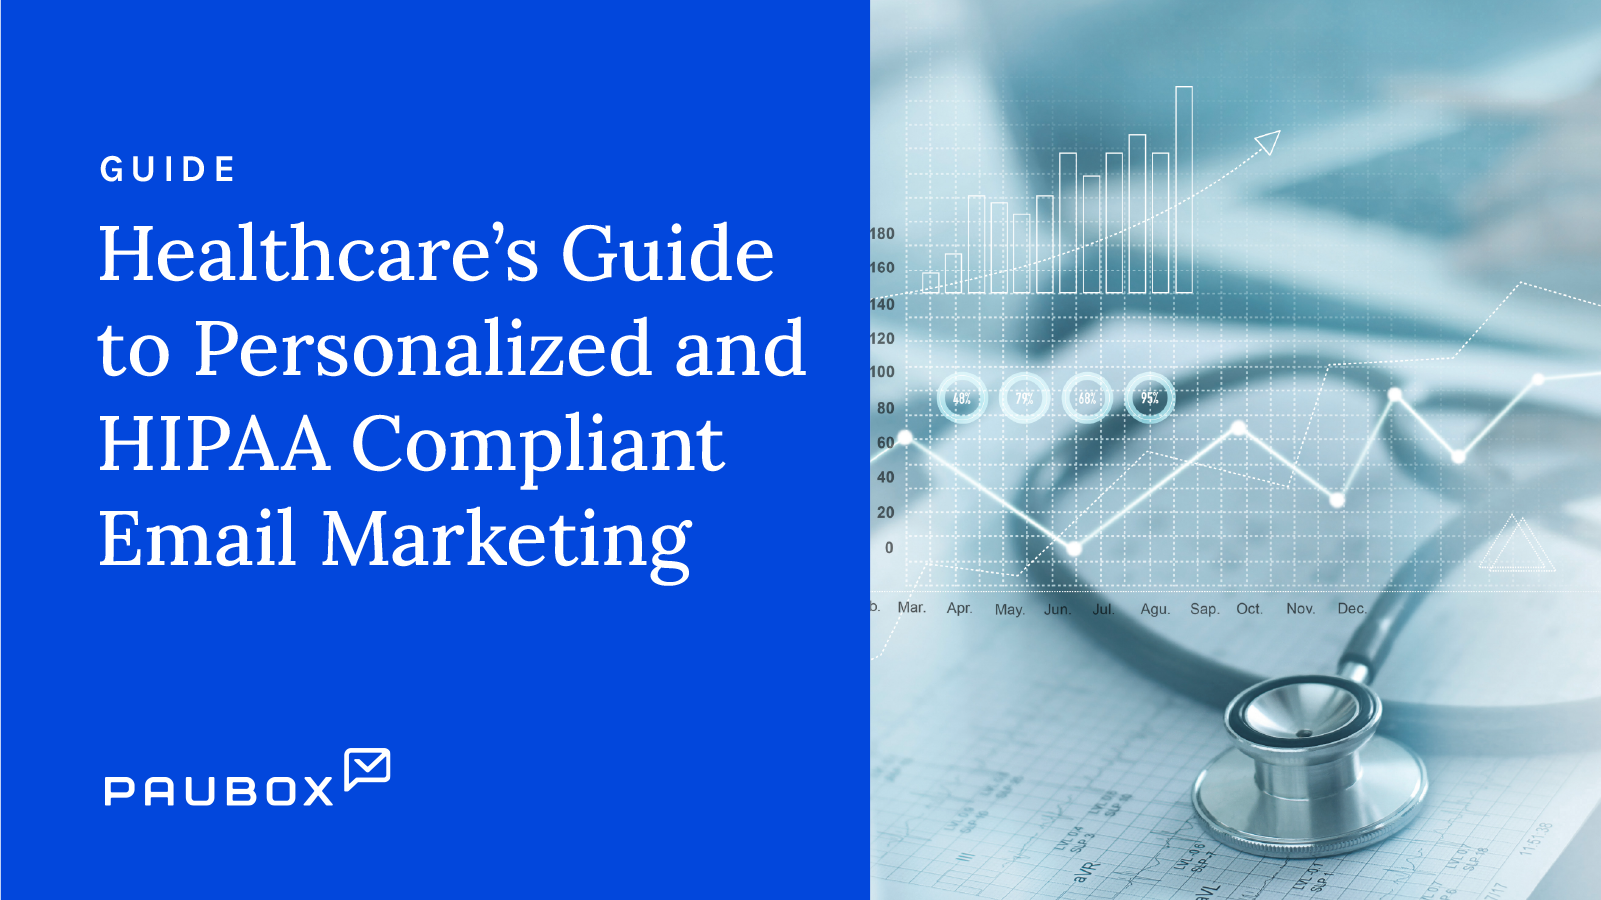 Healthcare’s Guide to Personalized and HIPAA Compliant Email Marketing